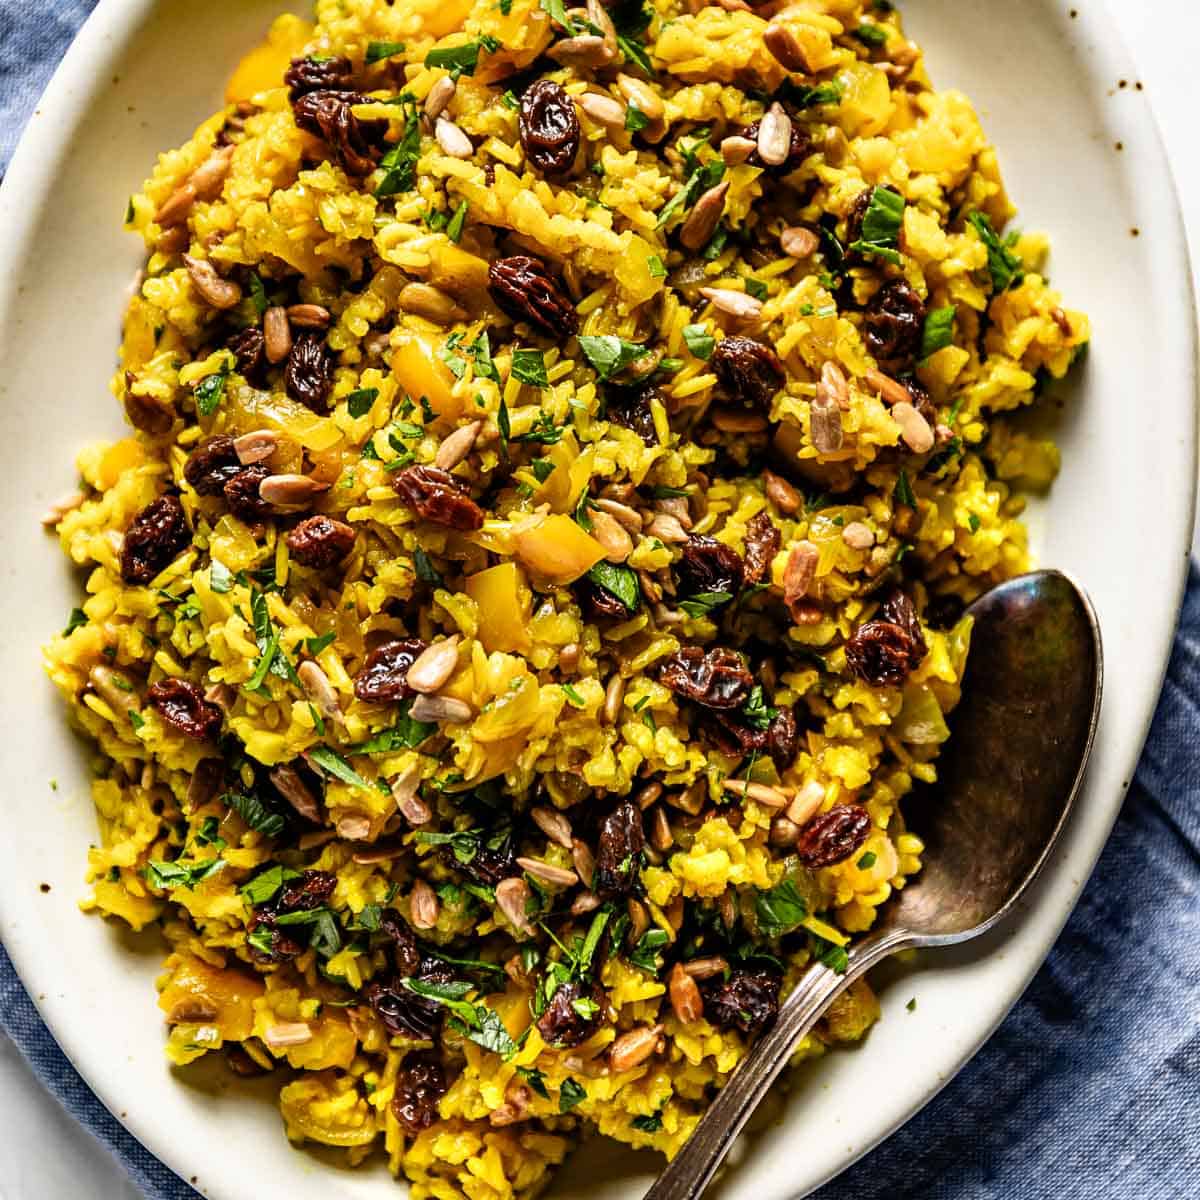 https://foolproofliving.com/wp-content/uploads/2013/06/Curry-brown-rice-recipe.jpg